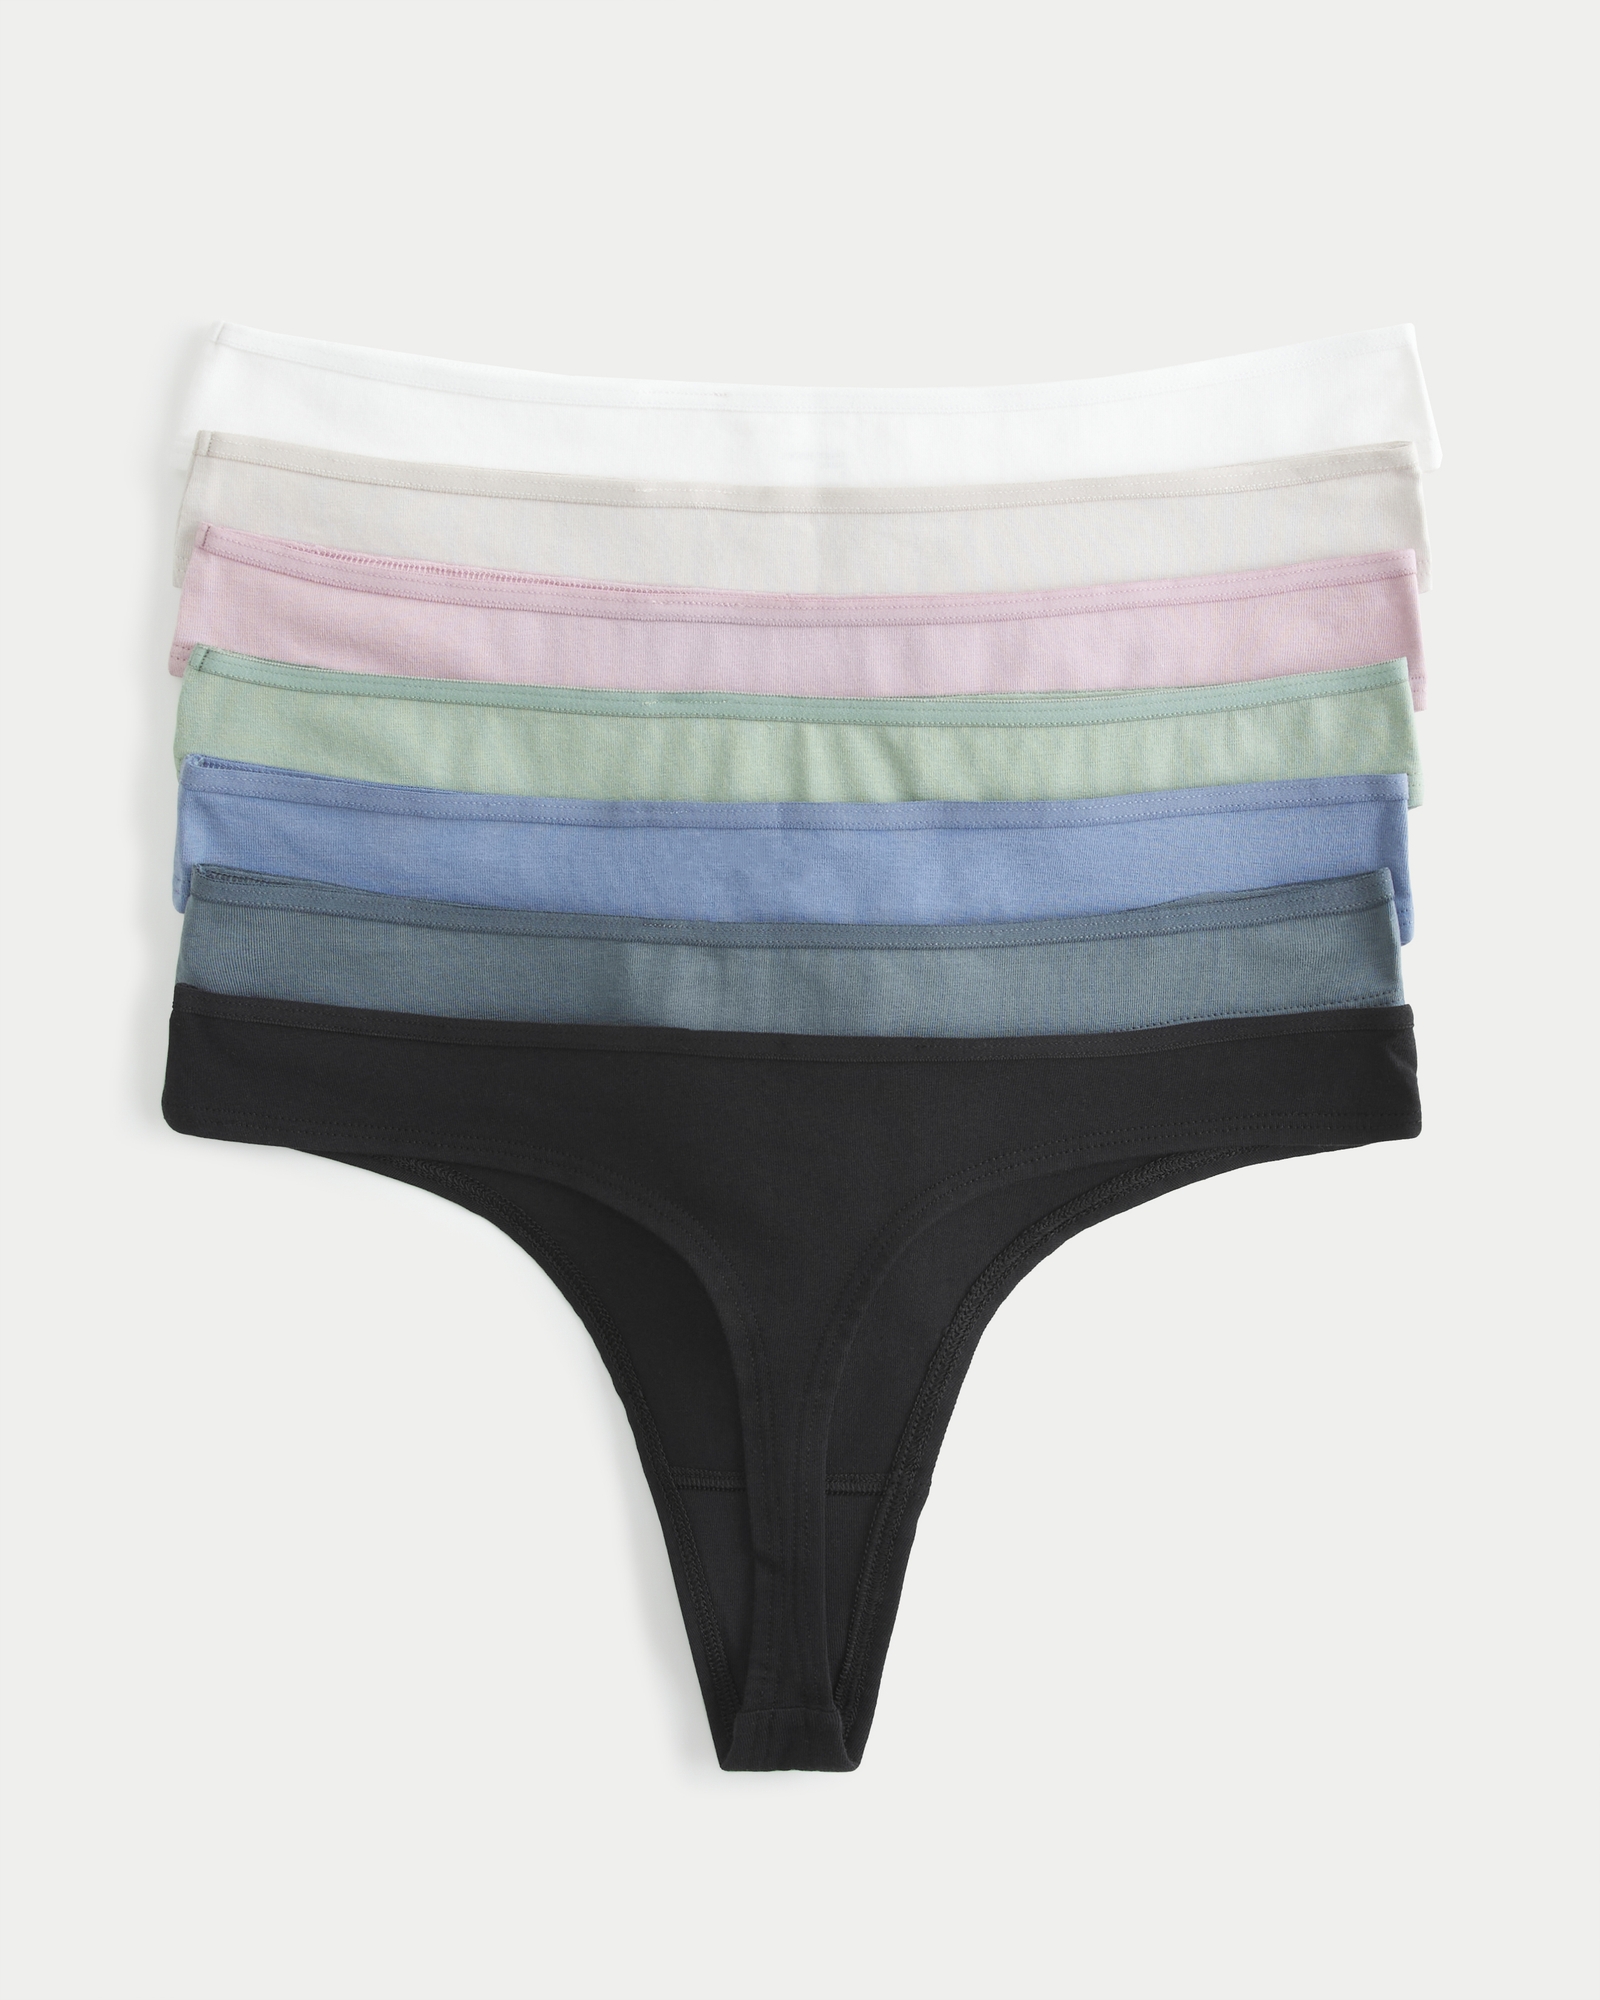 Women's Gilly Hicks Day-of-the-Week Thong Underwear 7-Pack